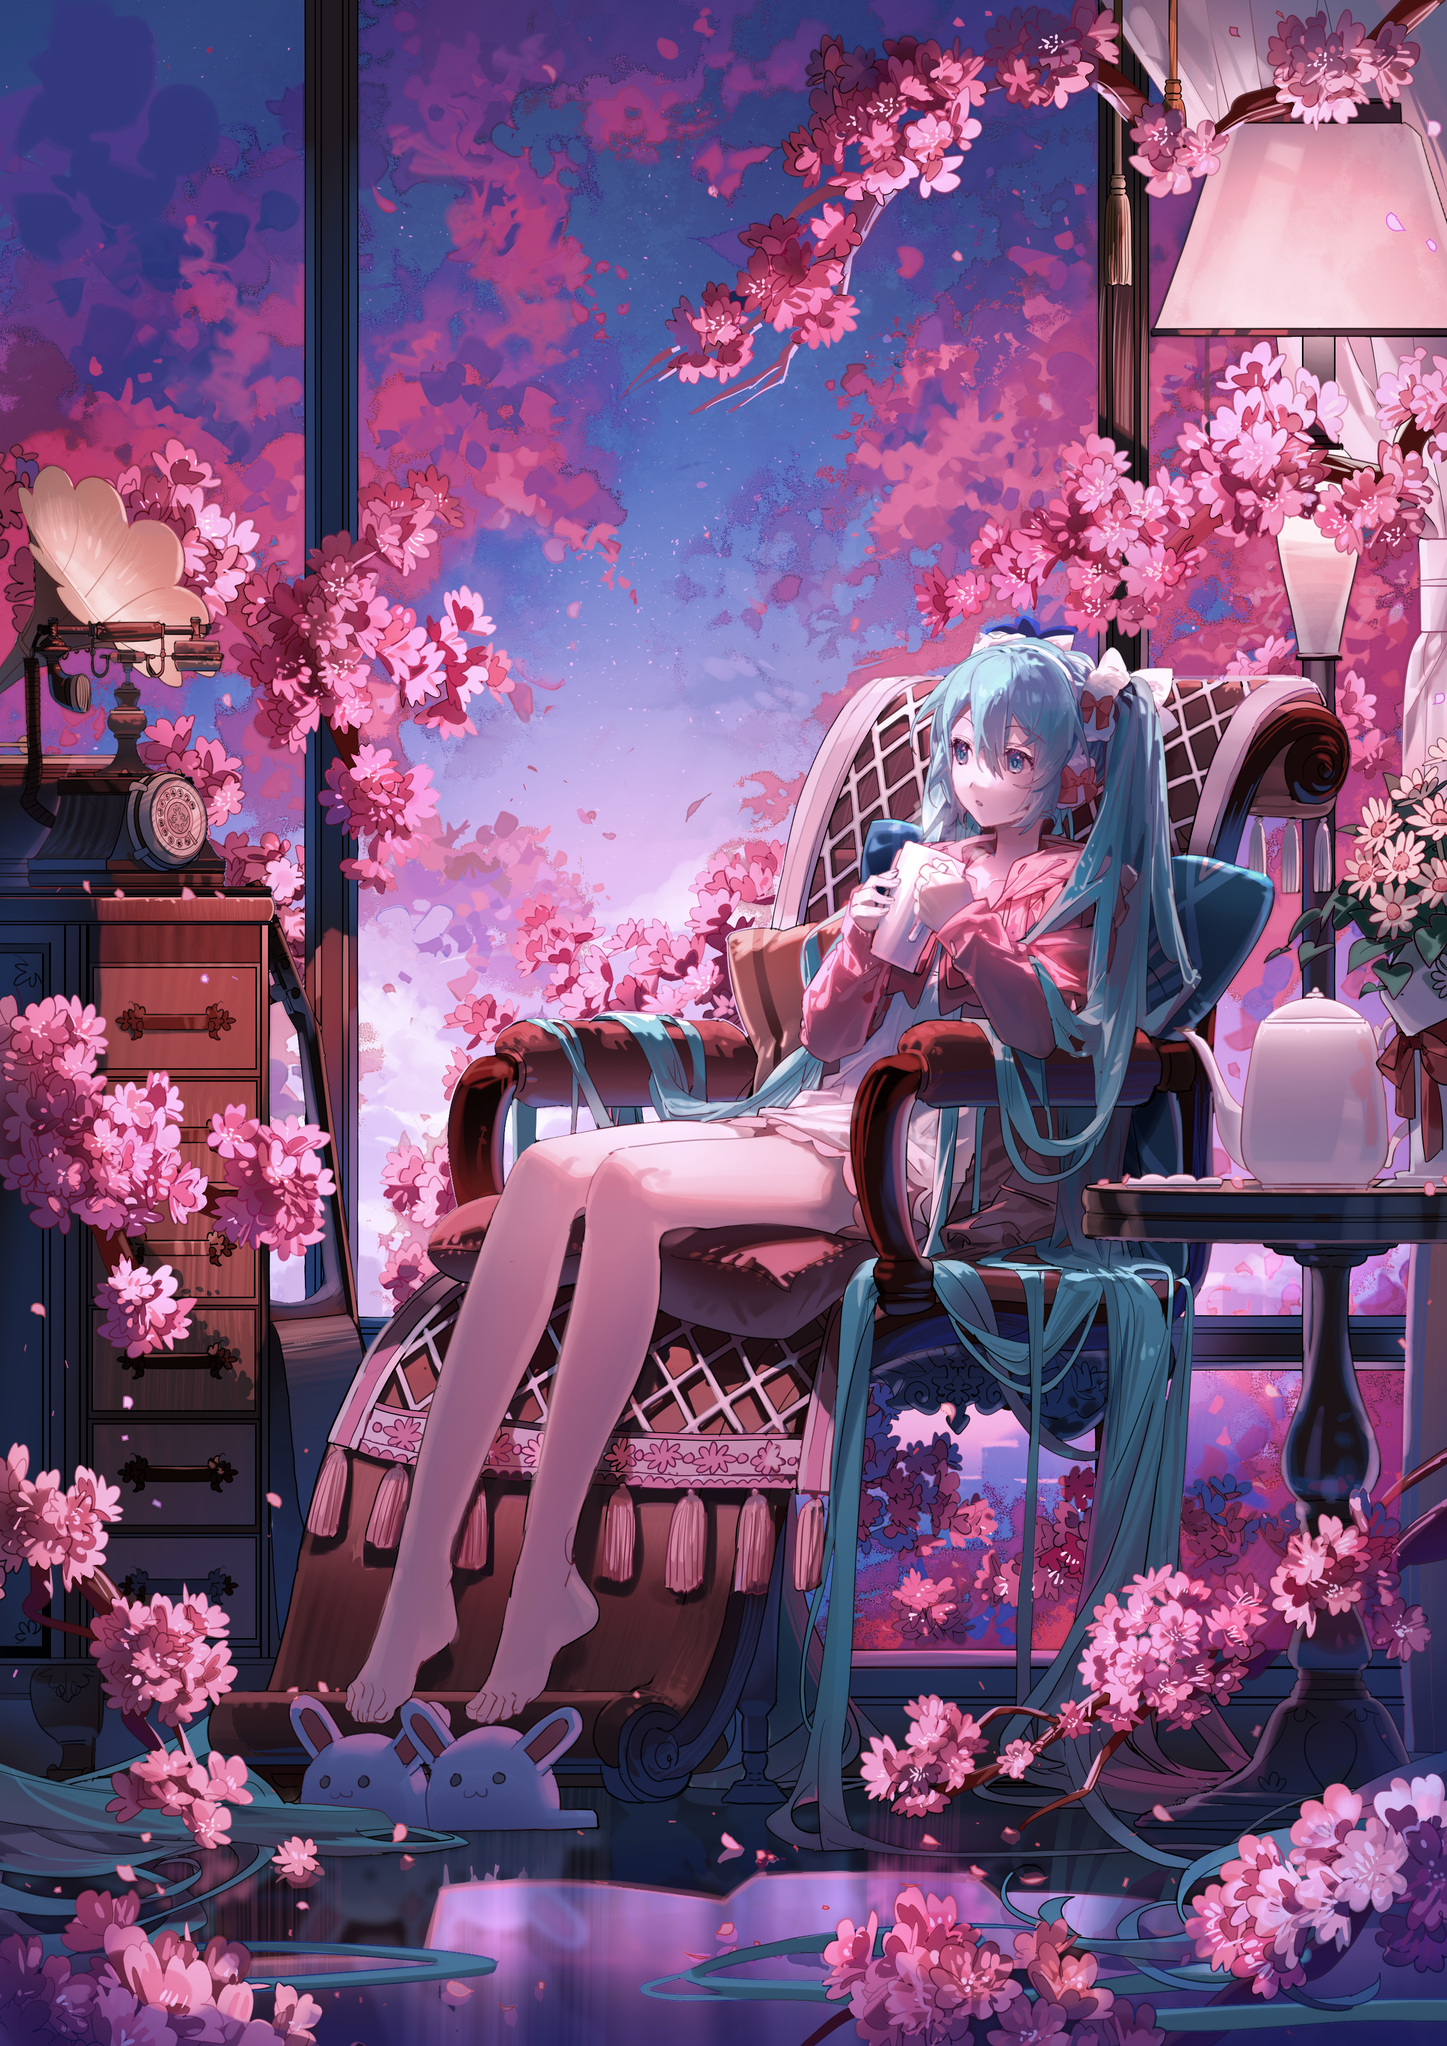 Anime 1447x2046 anime Pixiv anime girls Vocaloid Hatsune Miku flowers cherry blossom sitting gramophone barefoot portrait display chair long hair twintails blue hair blue eyes feet slippers drink reflection lamp looking away armchair Shuno (artist)